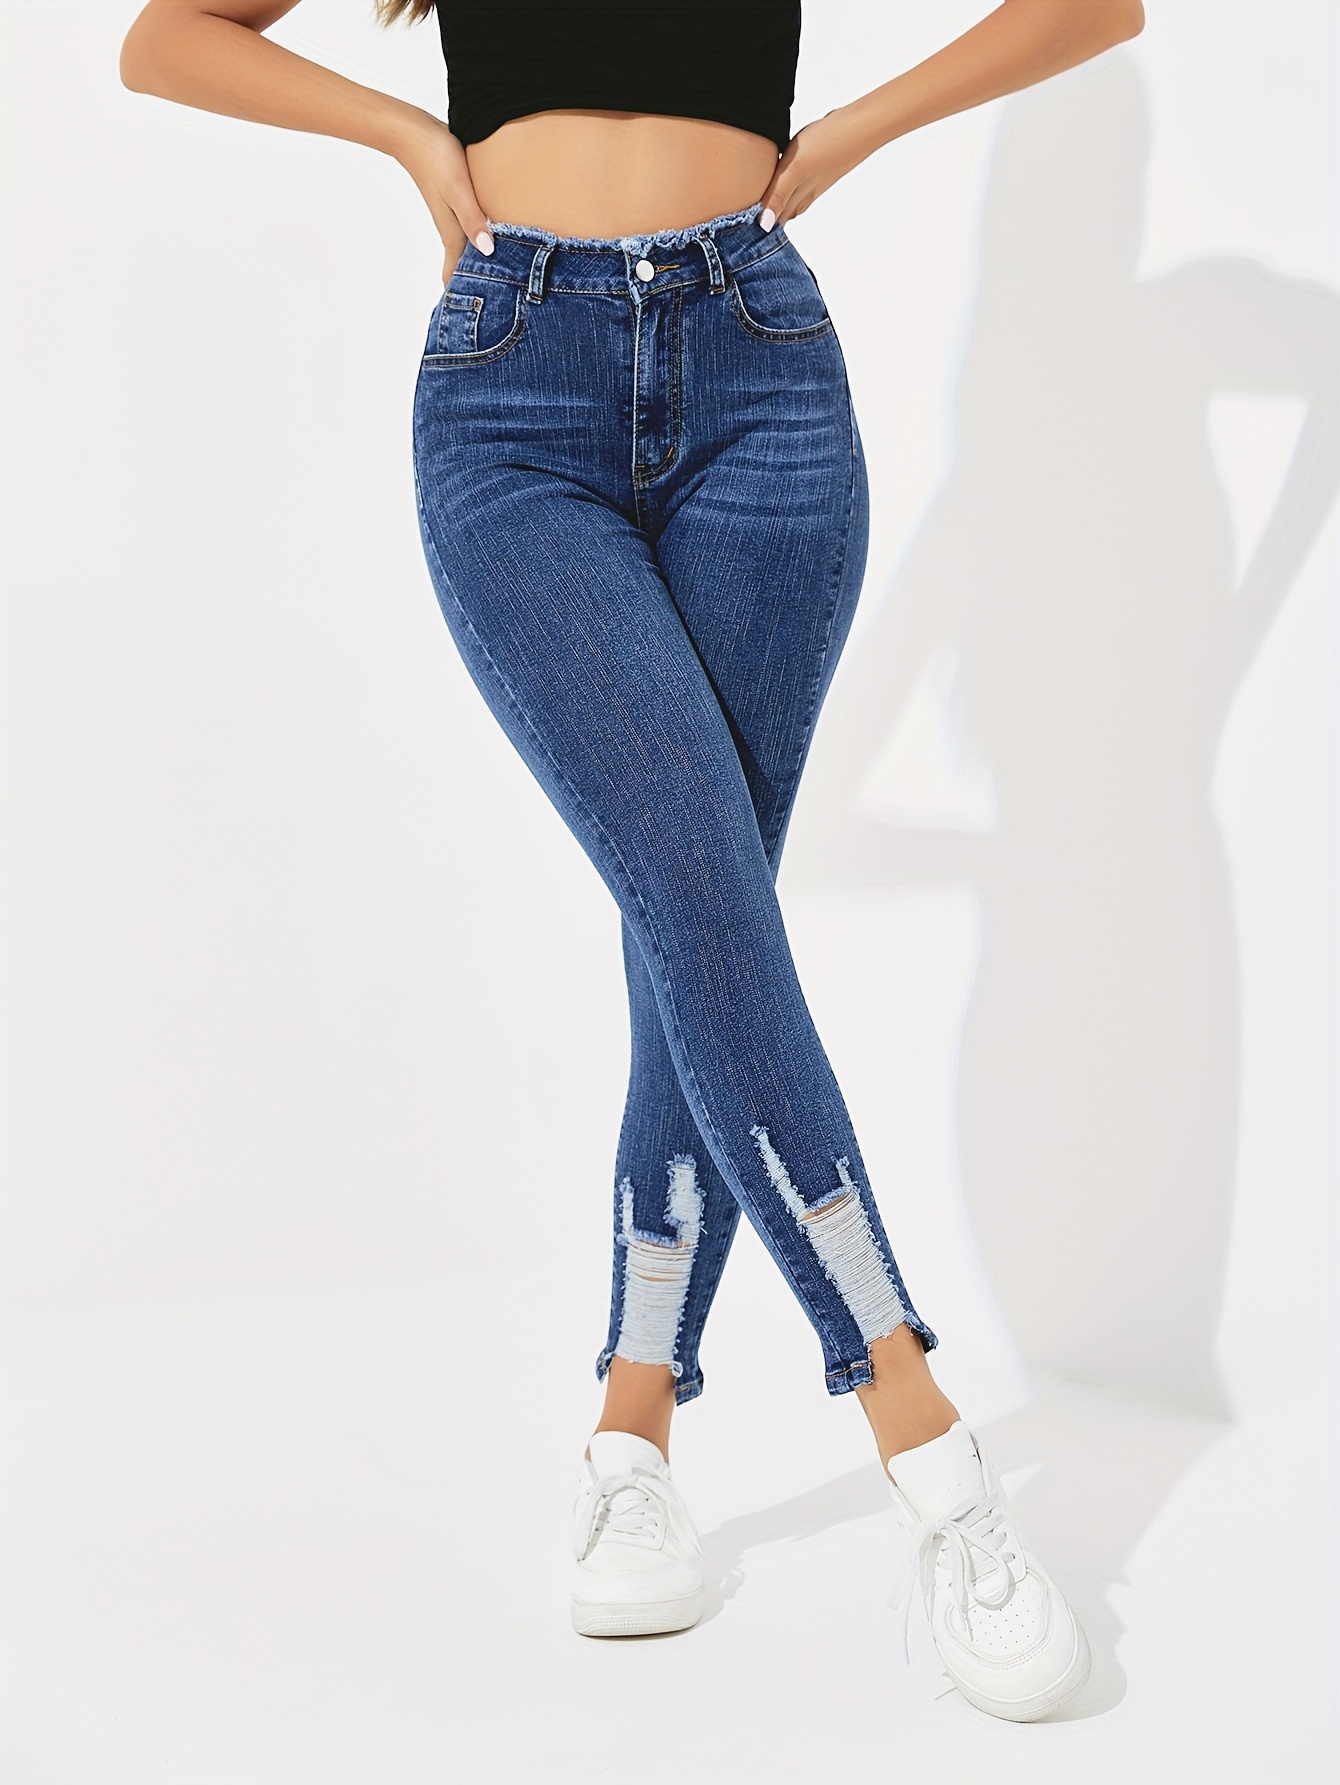 High Waist Vintage Blue Redbat Jeans For Ladies For Women Tight